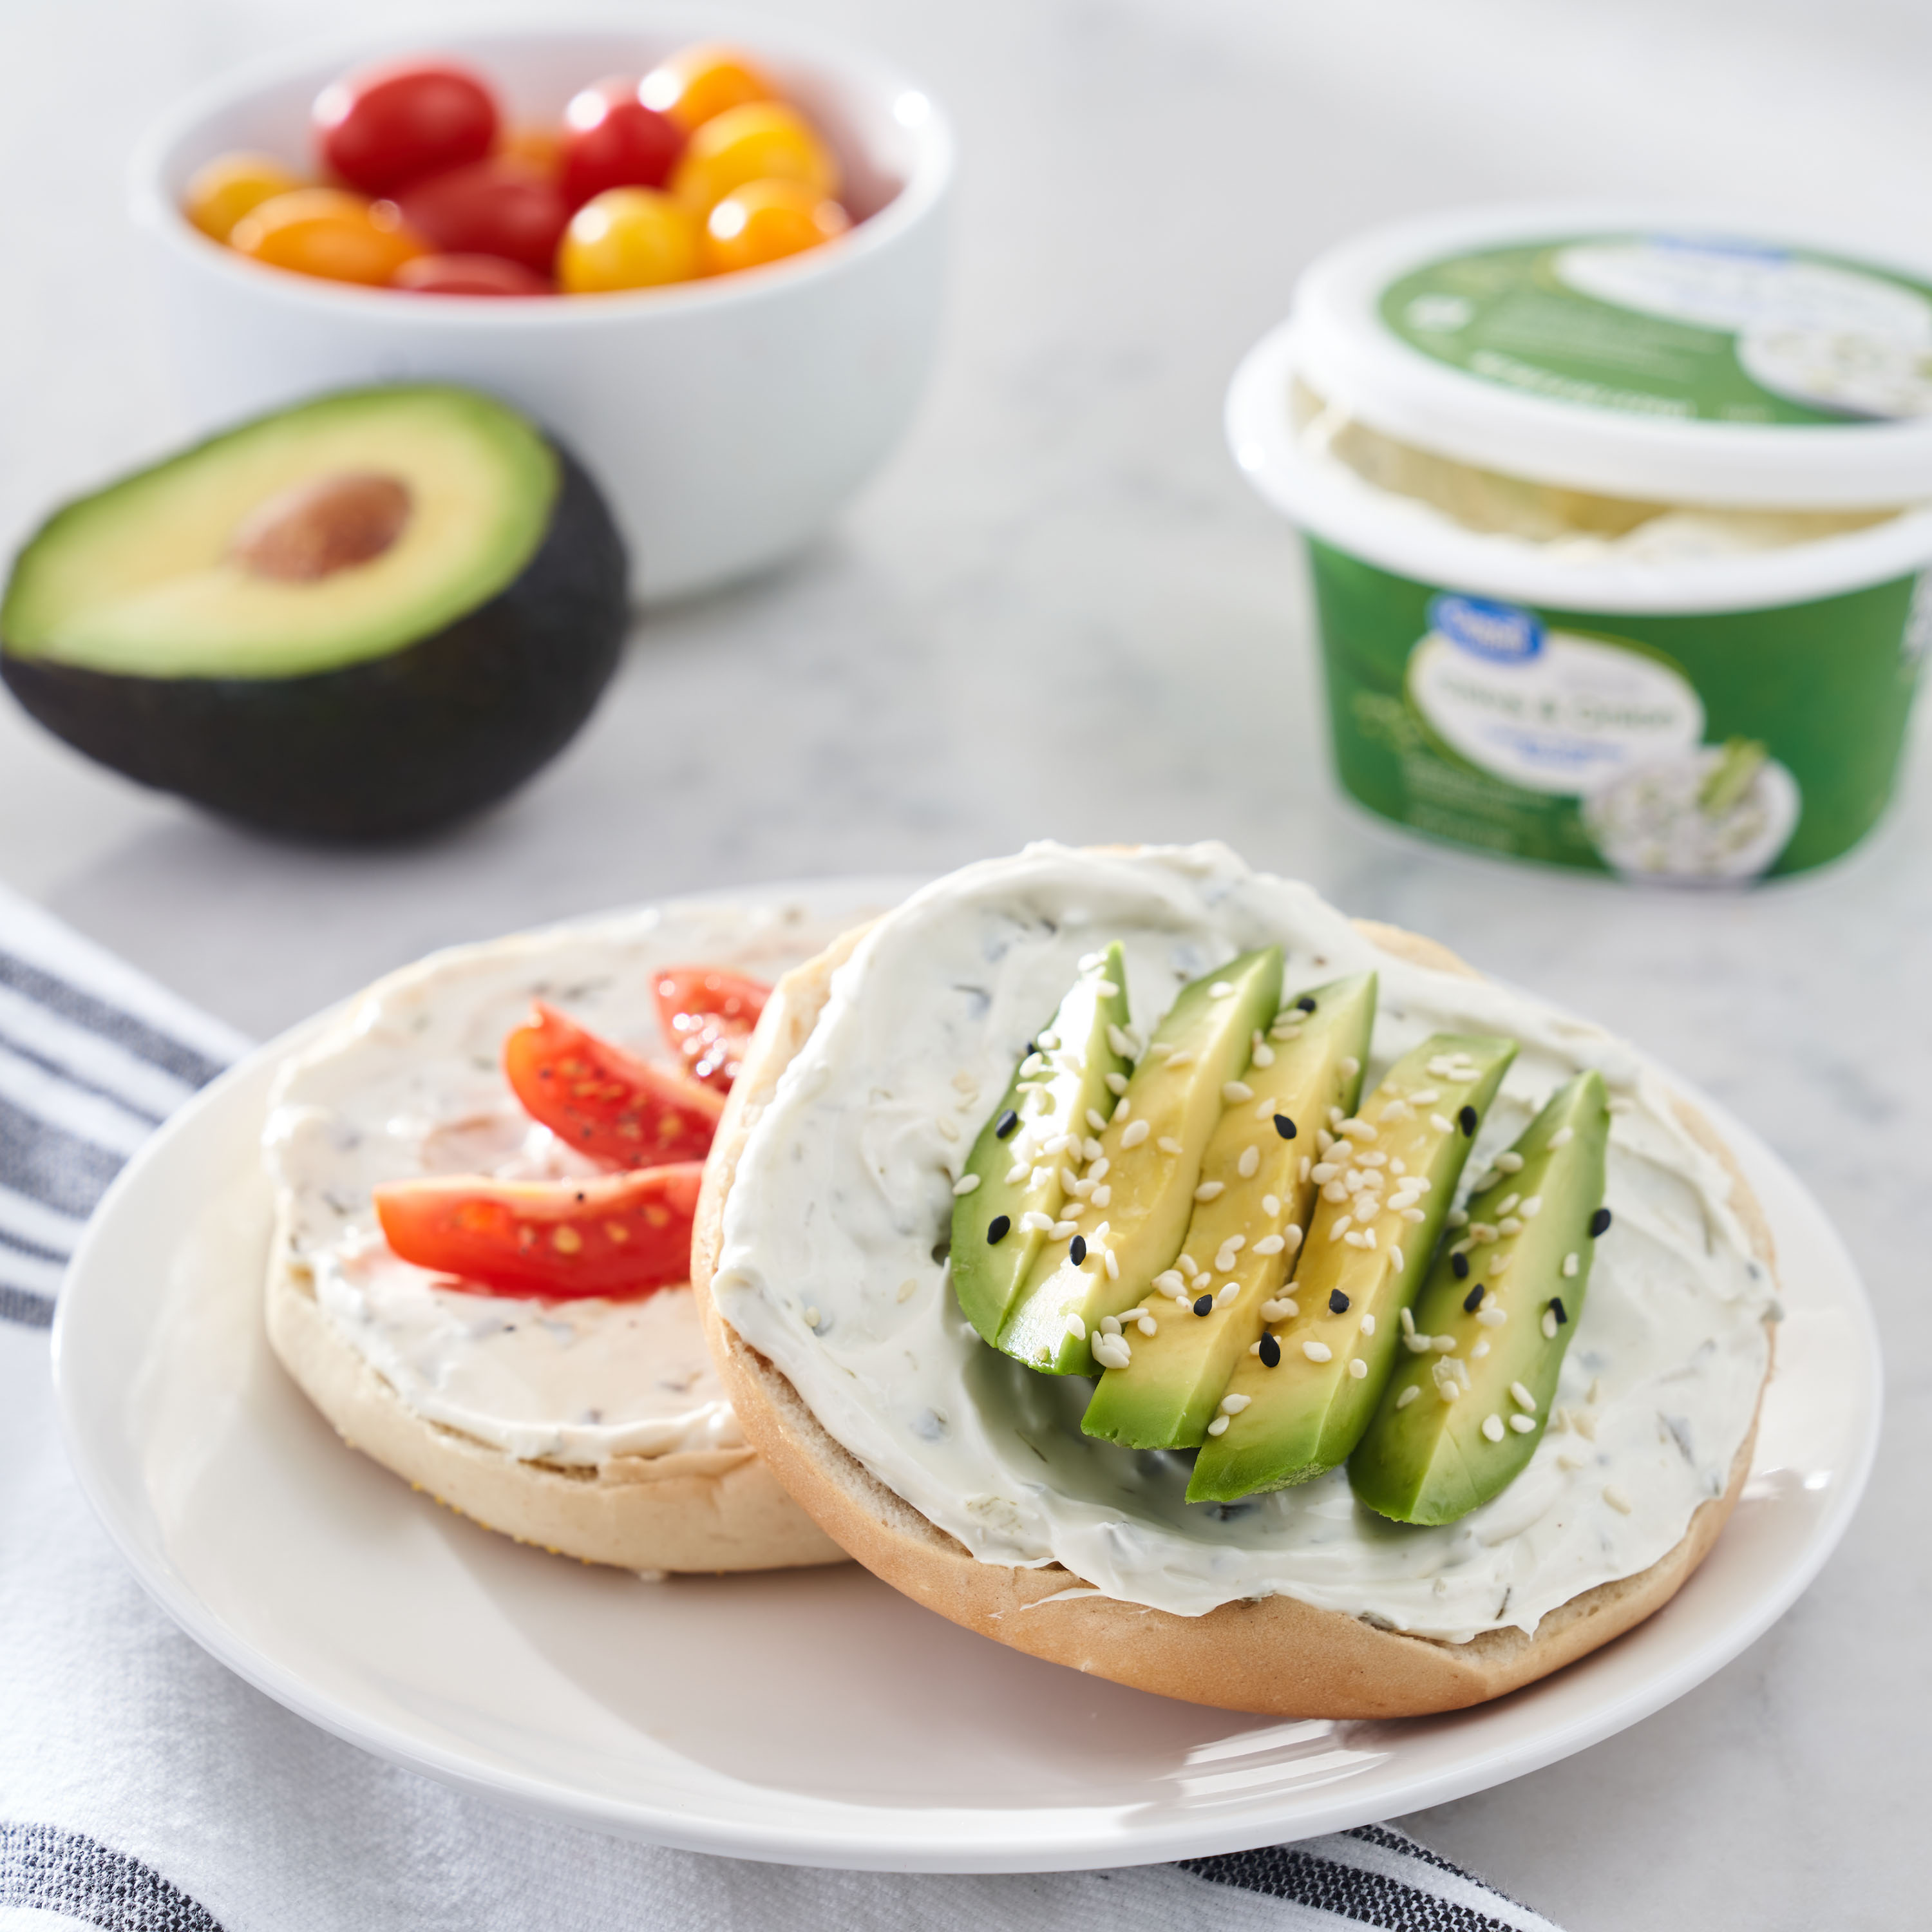 Great Value Chive & Onion Cream Cheese Spread, 8 oz Tub - image 2 of 7